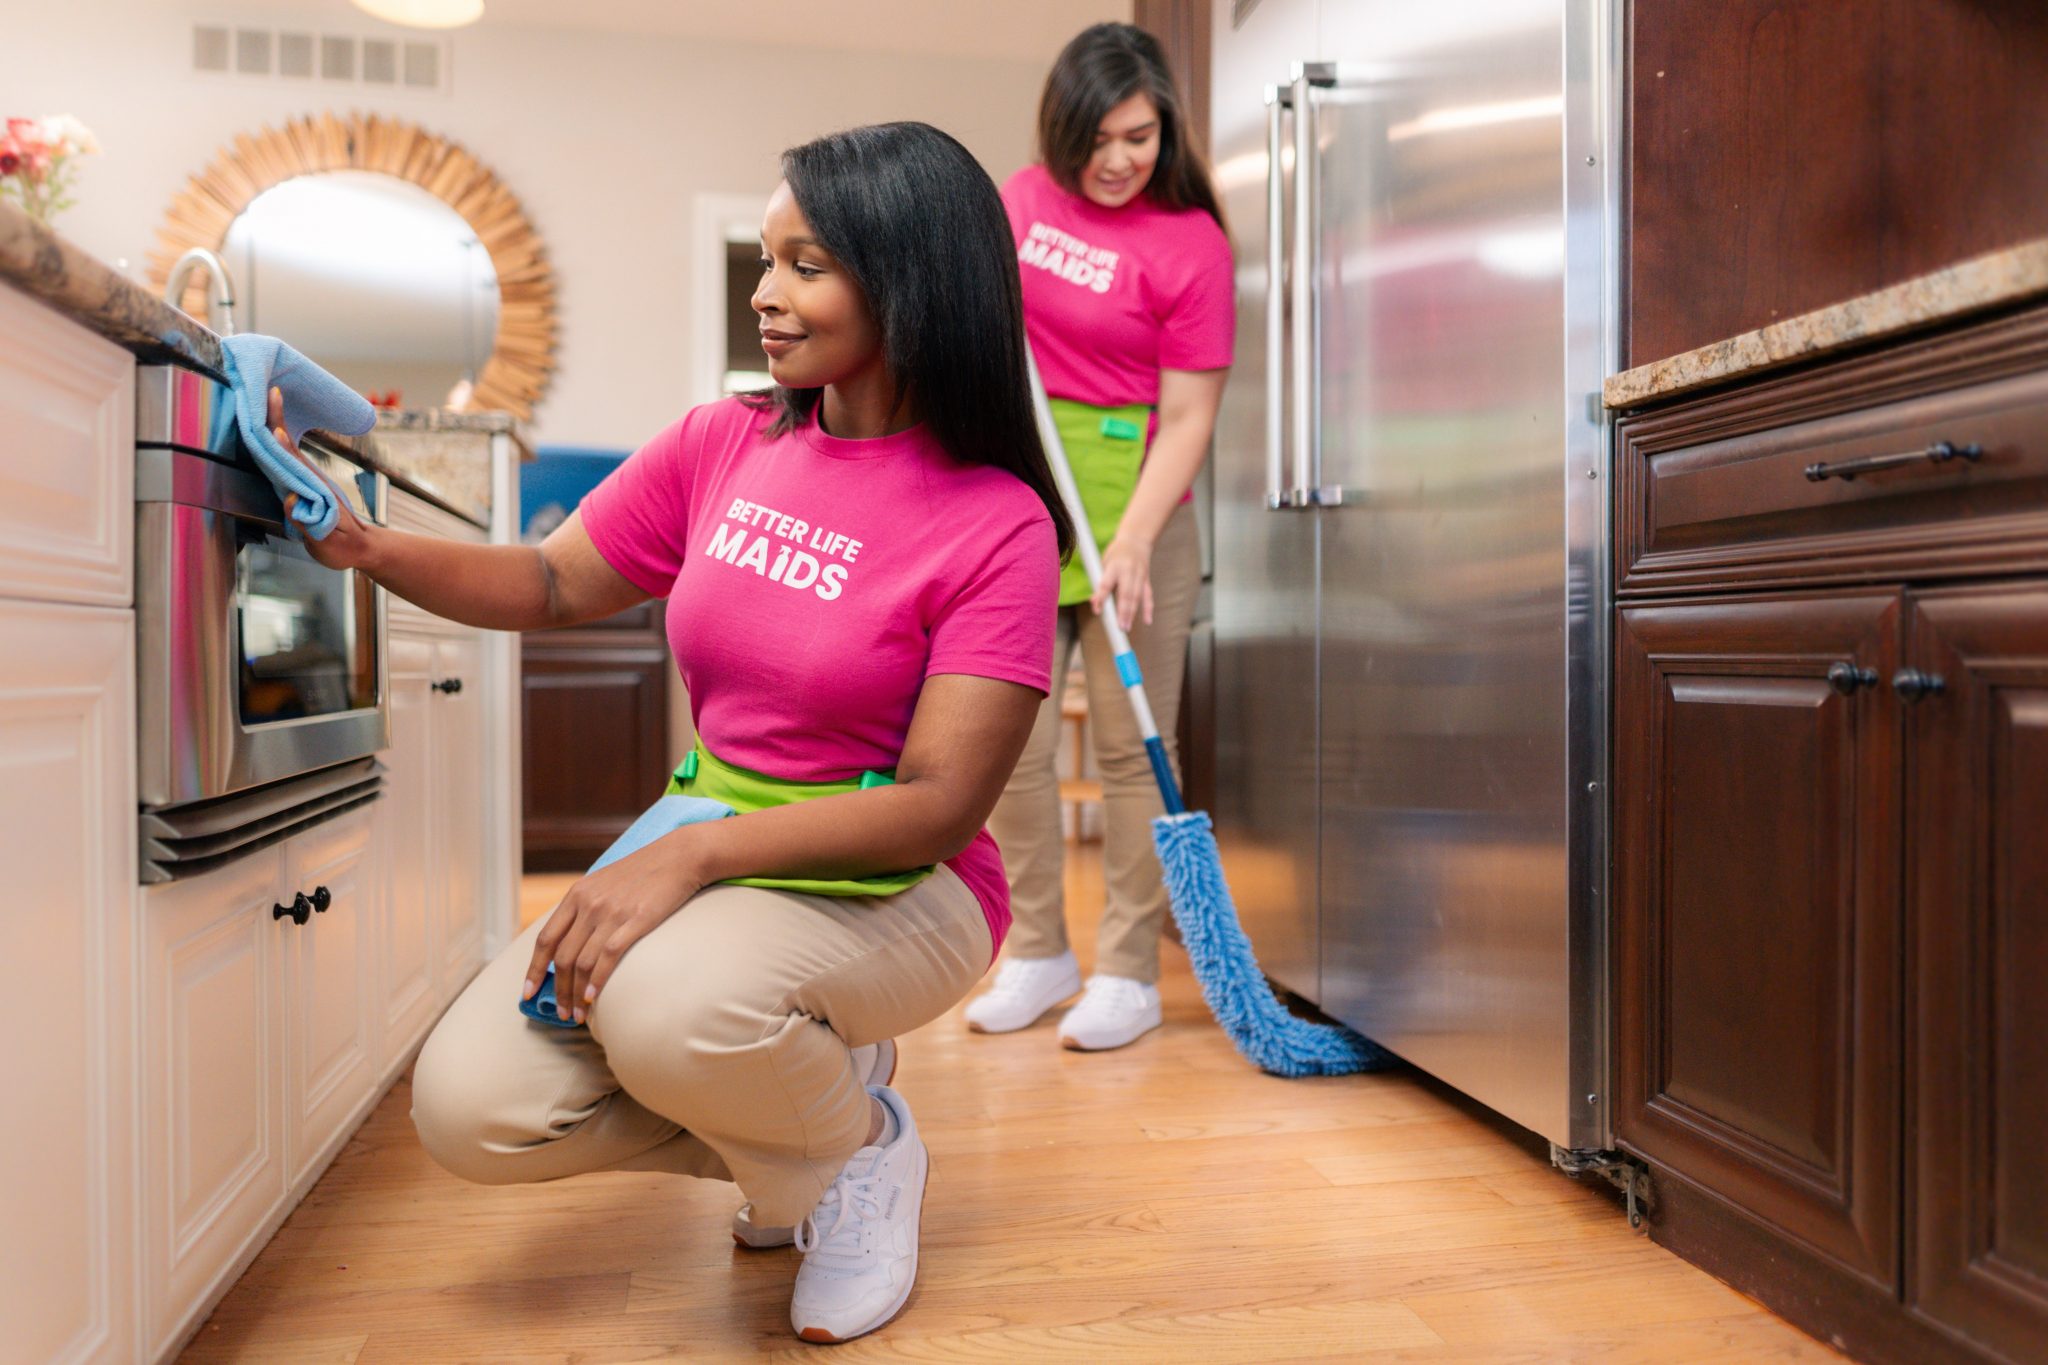 better life maids, safe cleaners, eco friendly maids, house cleaning in Des Peres, house cleaning near me, house cleaning near Des Peres, best maids in Des Peres, best maid service near me, top quality maids, residential cleaner, move out maids Des Peres